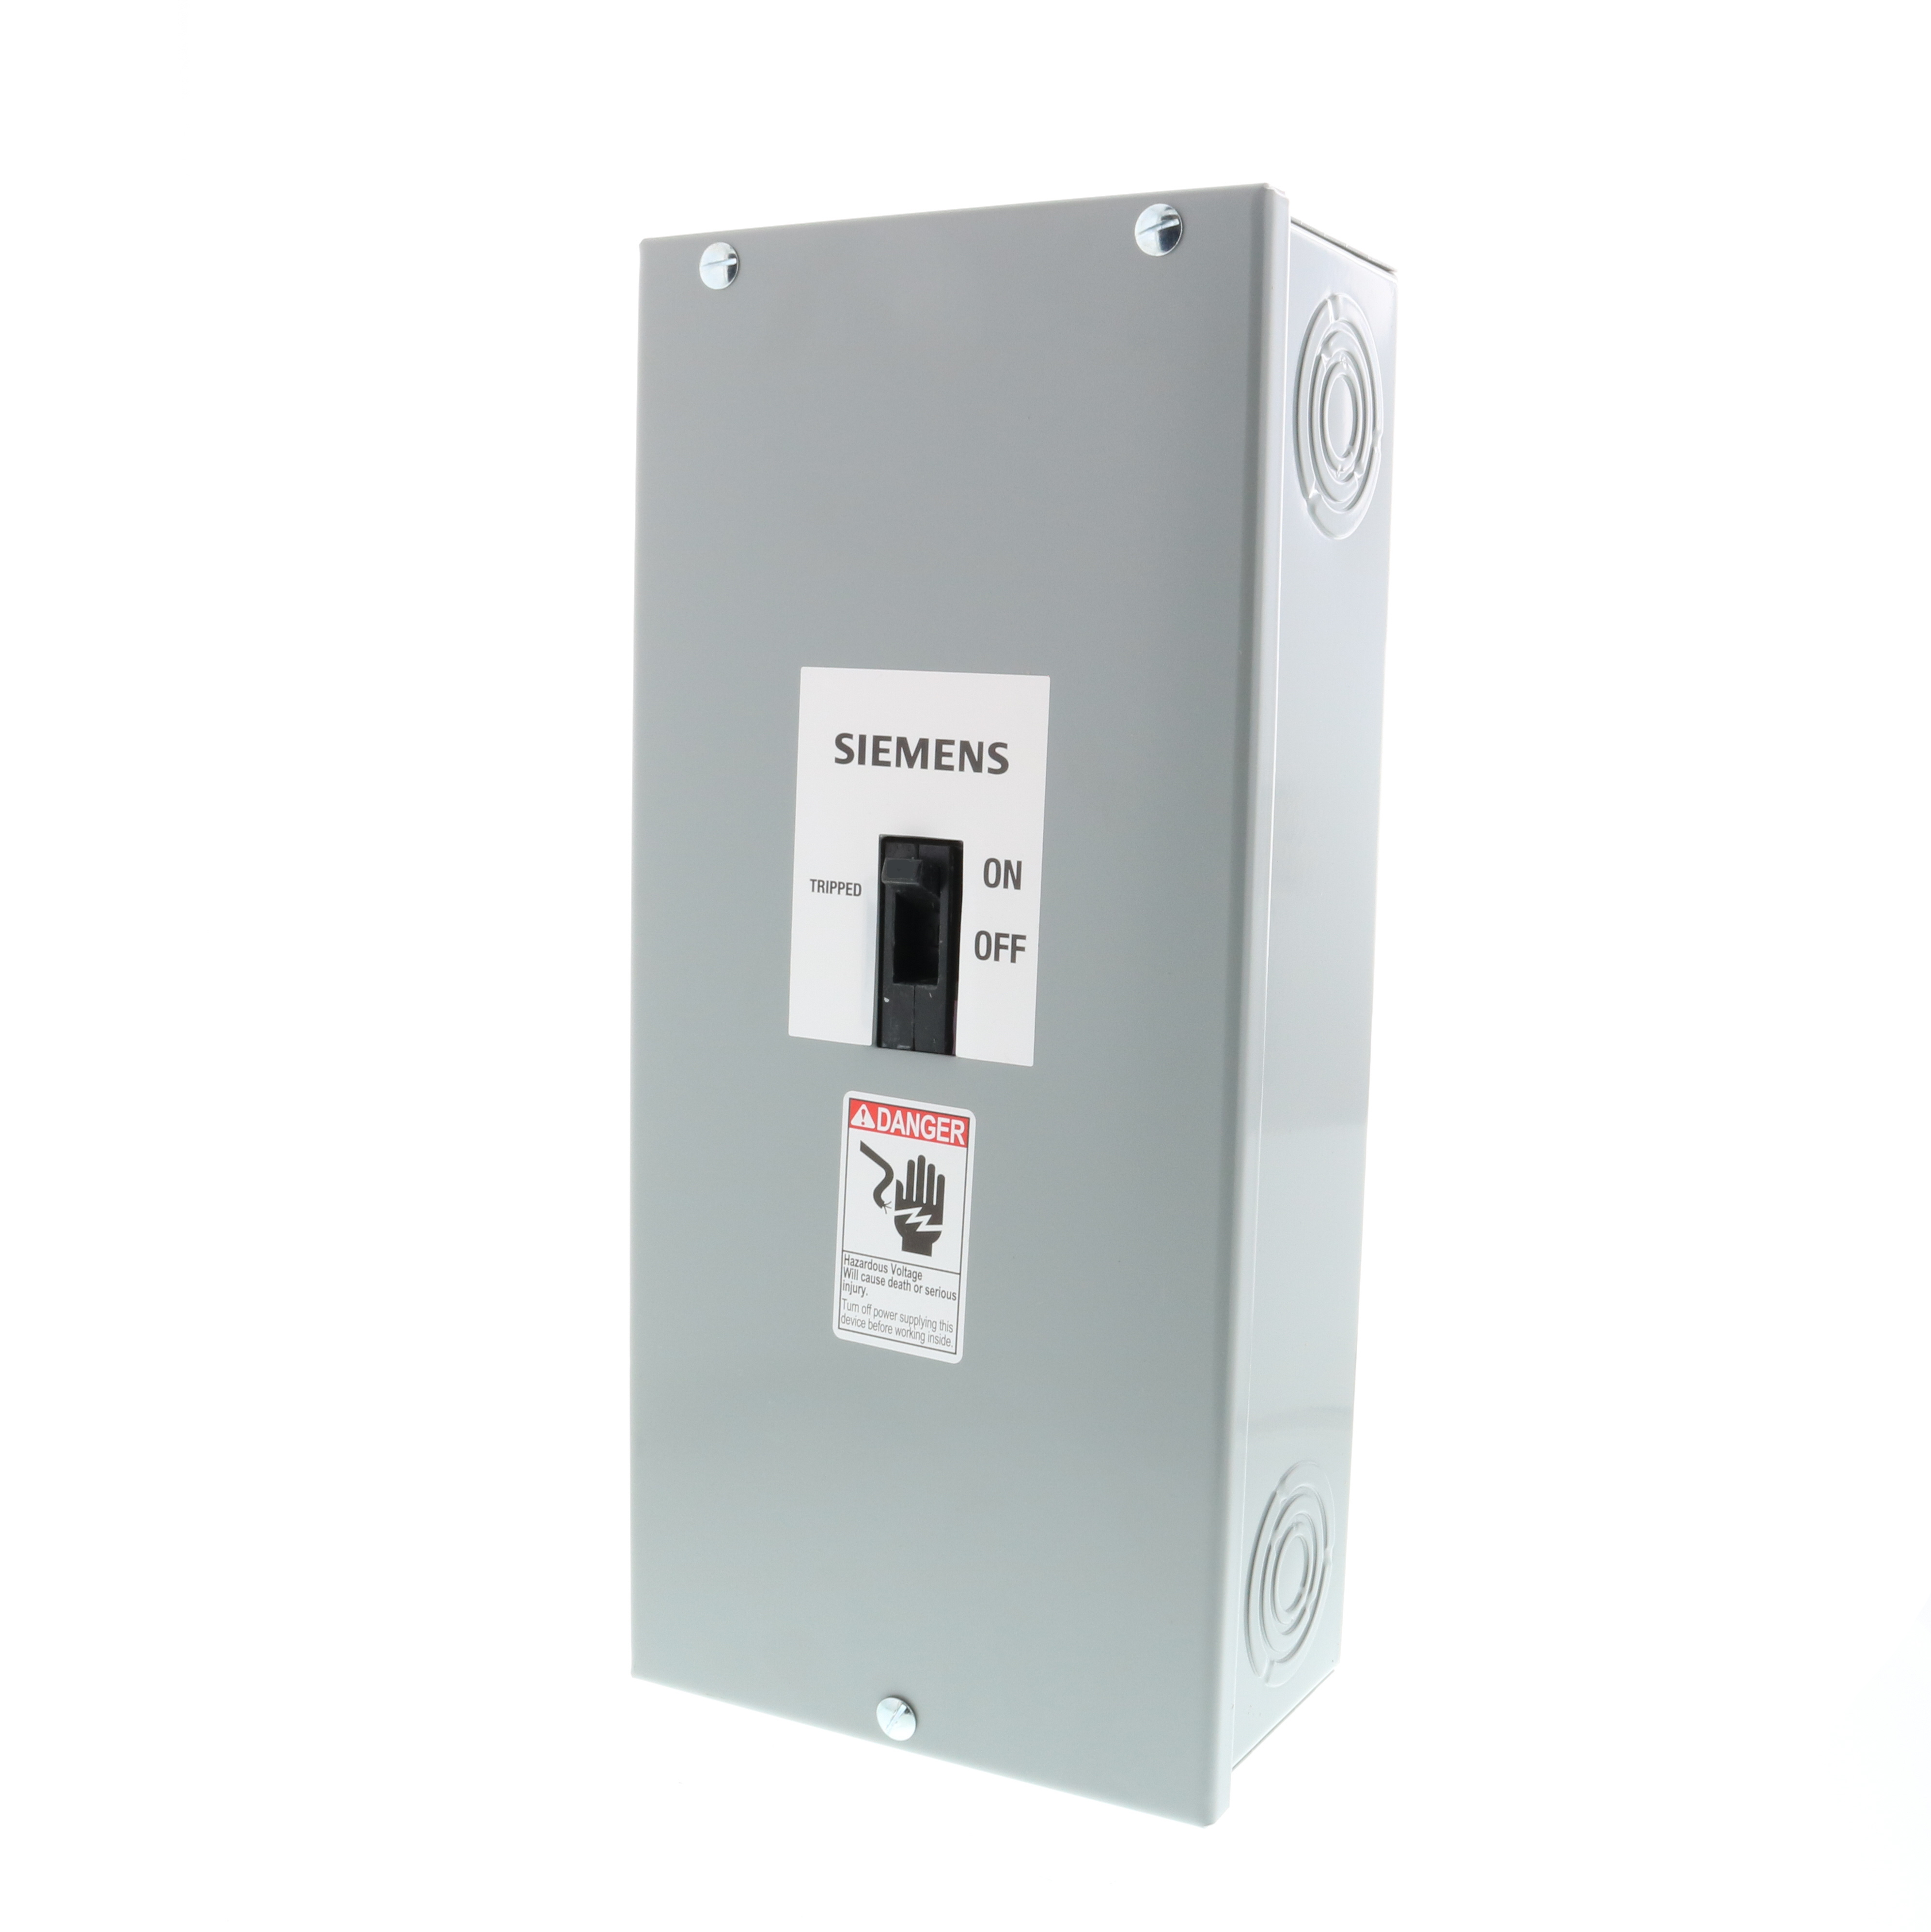 SIEMENS LOW VOLTAGE ENCLOSED SENTRON MOLDED CASE CIRCUIT BREAKER (ASSEMBLED) WITH THERMAL - MAGNETIC TRIP UNIT. 20A 2-POLE 240V STANDARD 40 DEG C BREAKER ED FRAME WITH STANDARD BREAKING CAPACITY (ED22B020). NON-INTERCHANGEABLE TRIP UNIT. NEMA TYPE 1 ENCLOSURE SURFACE MOUNTED (E2N1S) WITH NEUTRAL (W53045). INCLUDES LINE AND LOAD SIDE LUGS (SA1E025) WIRE RANGE 14 - 10AWG (CU) / 12 - 10AWG (AL). ENCLOSURE DIMENSIONS (W x H x D) IN 7.50 x 16.72 x 5.06.